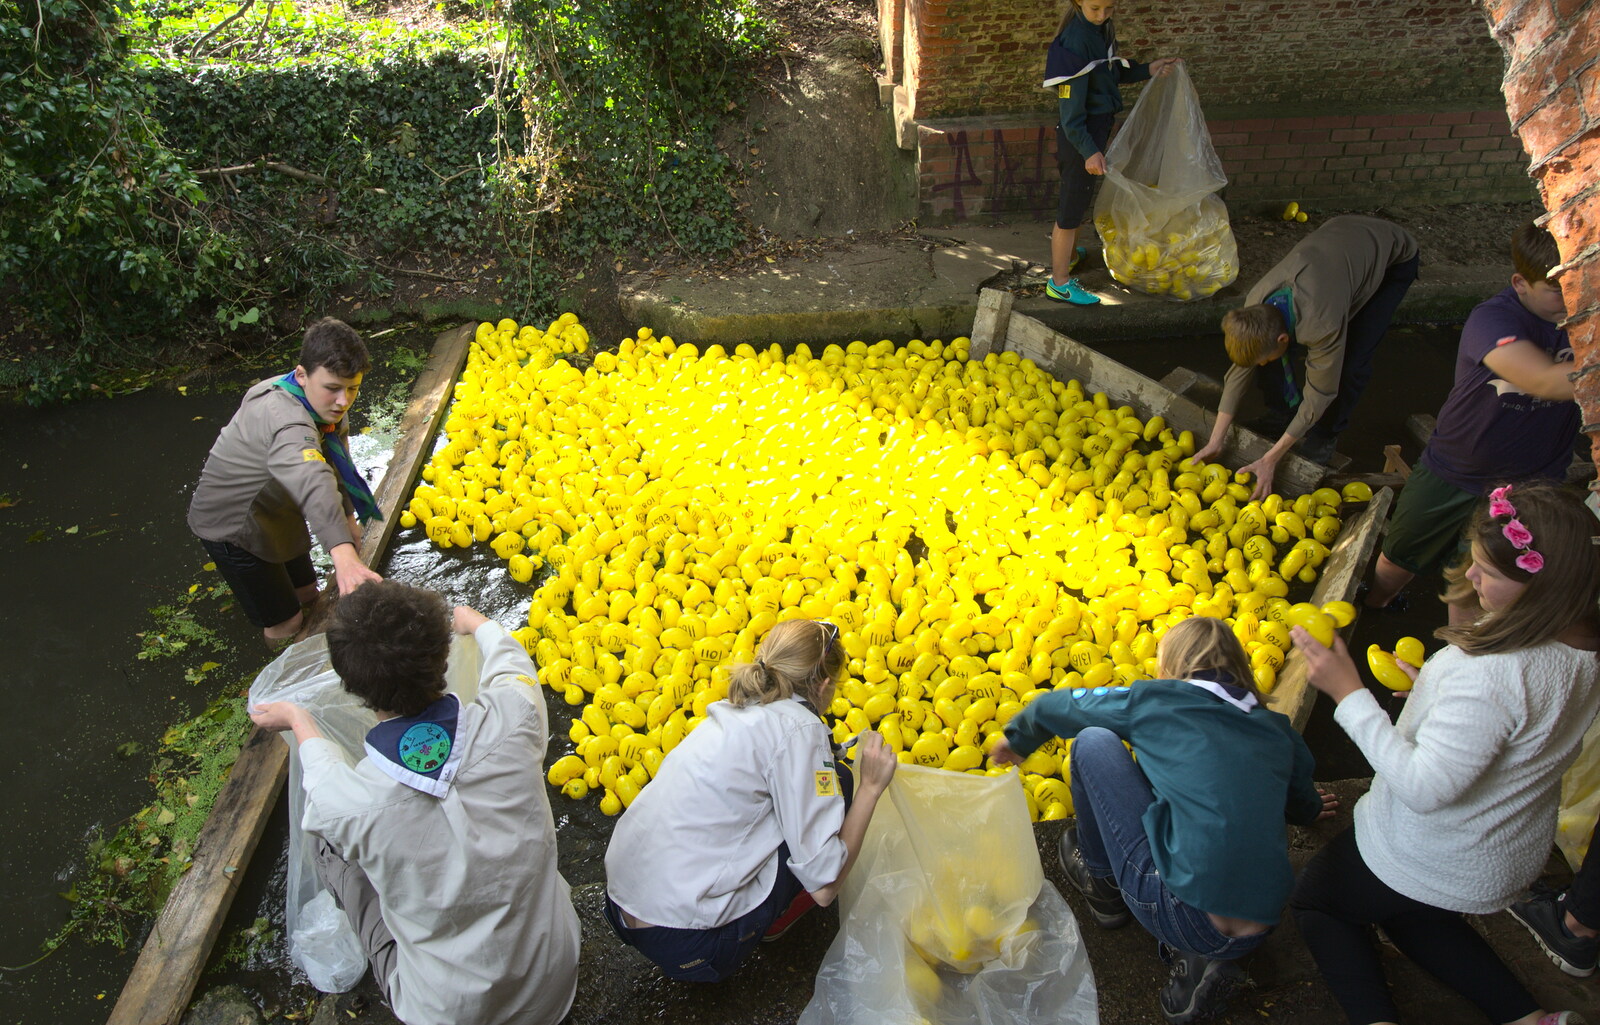 The ducks are all picked out of the river from The Eye Scouts Duck Race, The Pennings, Eye, Suffolk - 24th September 2016